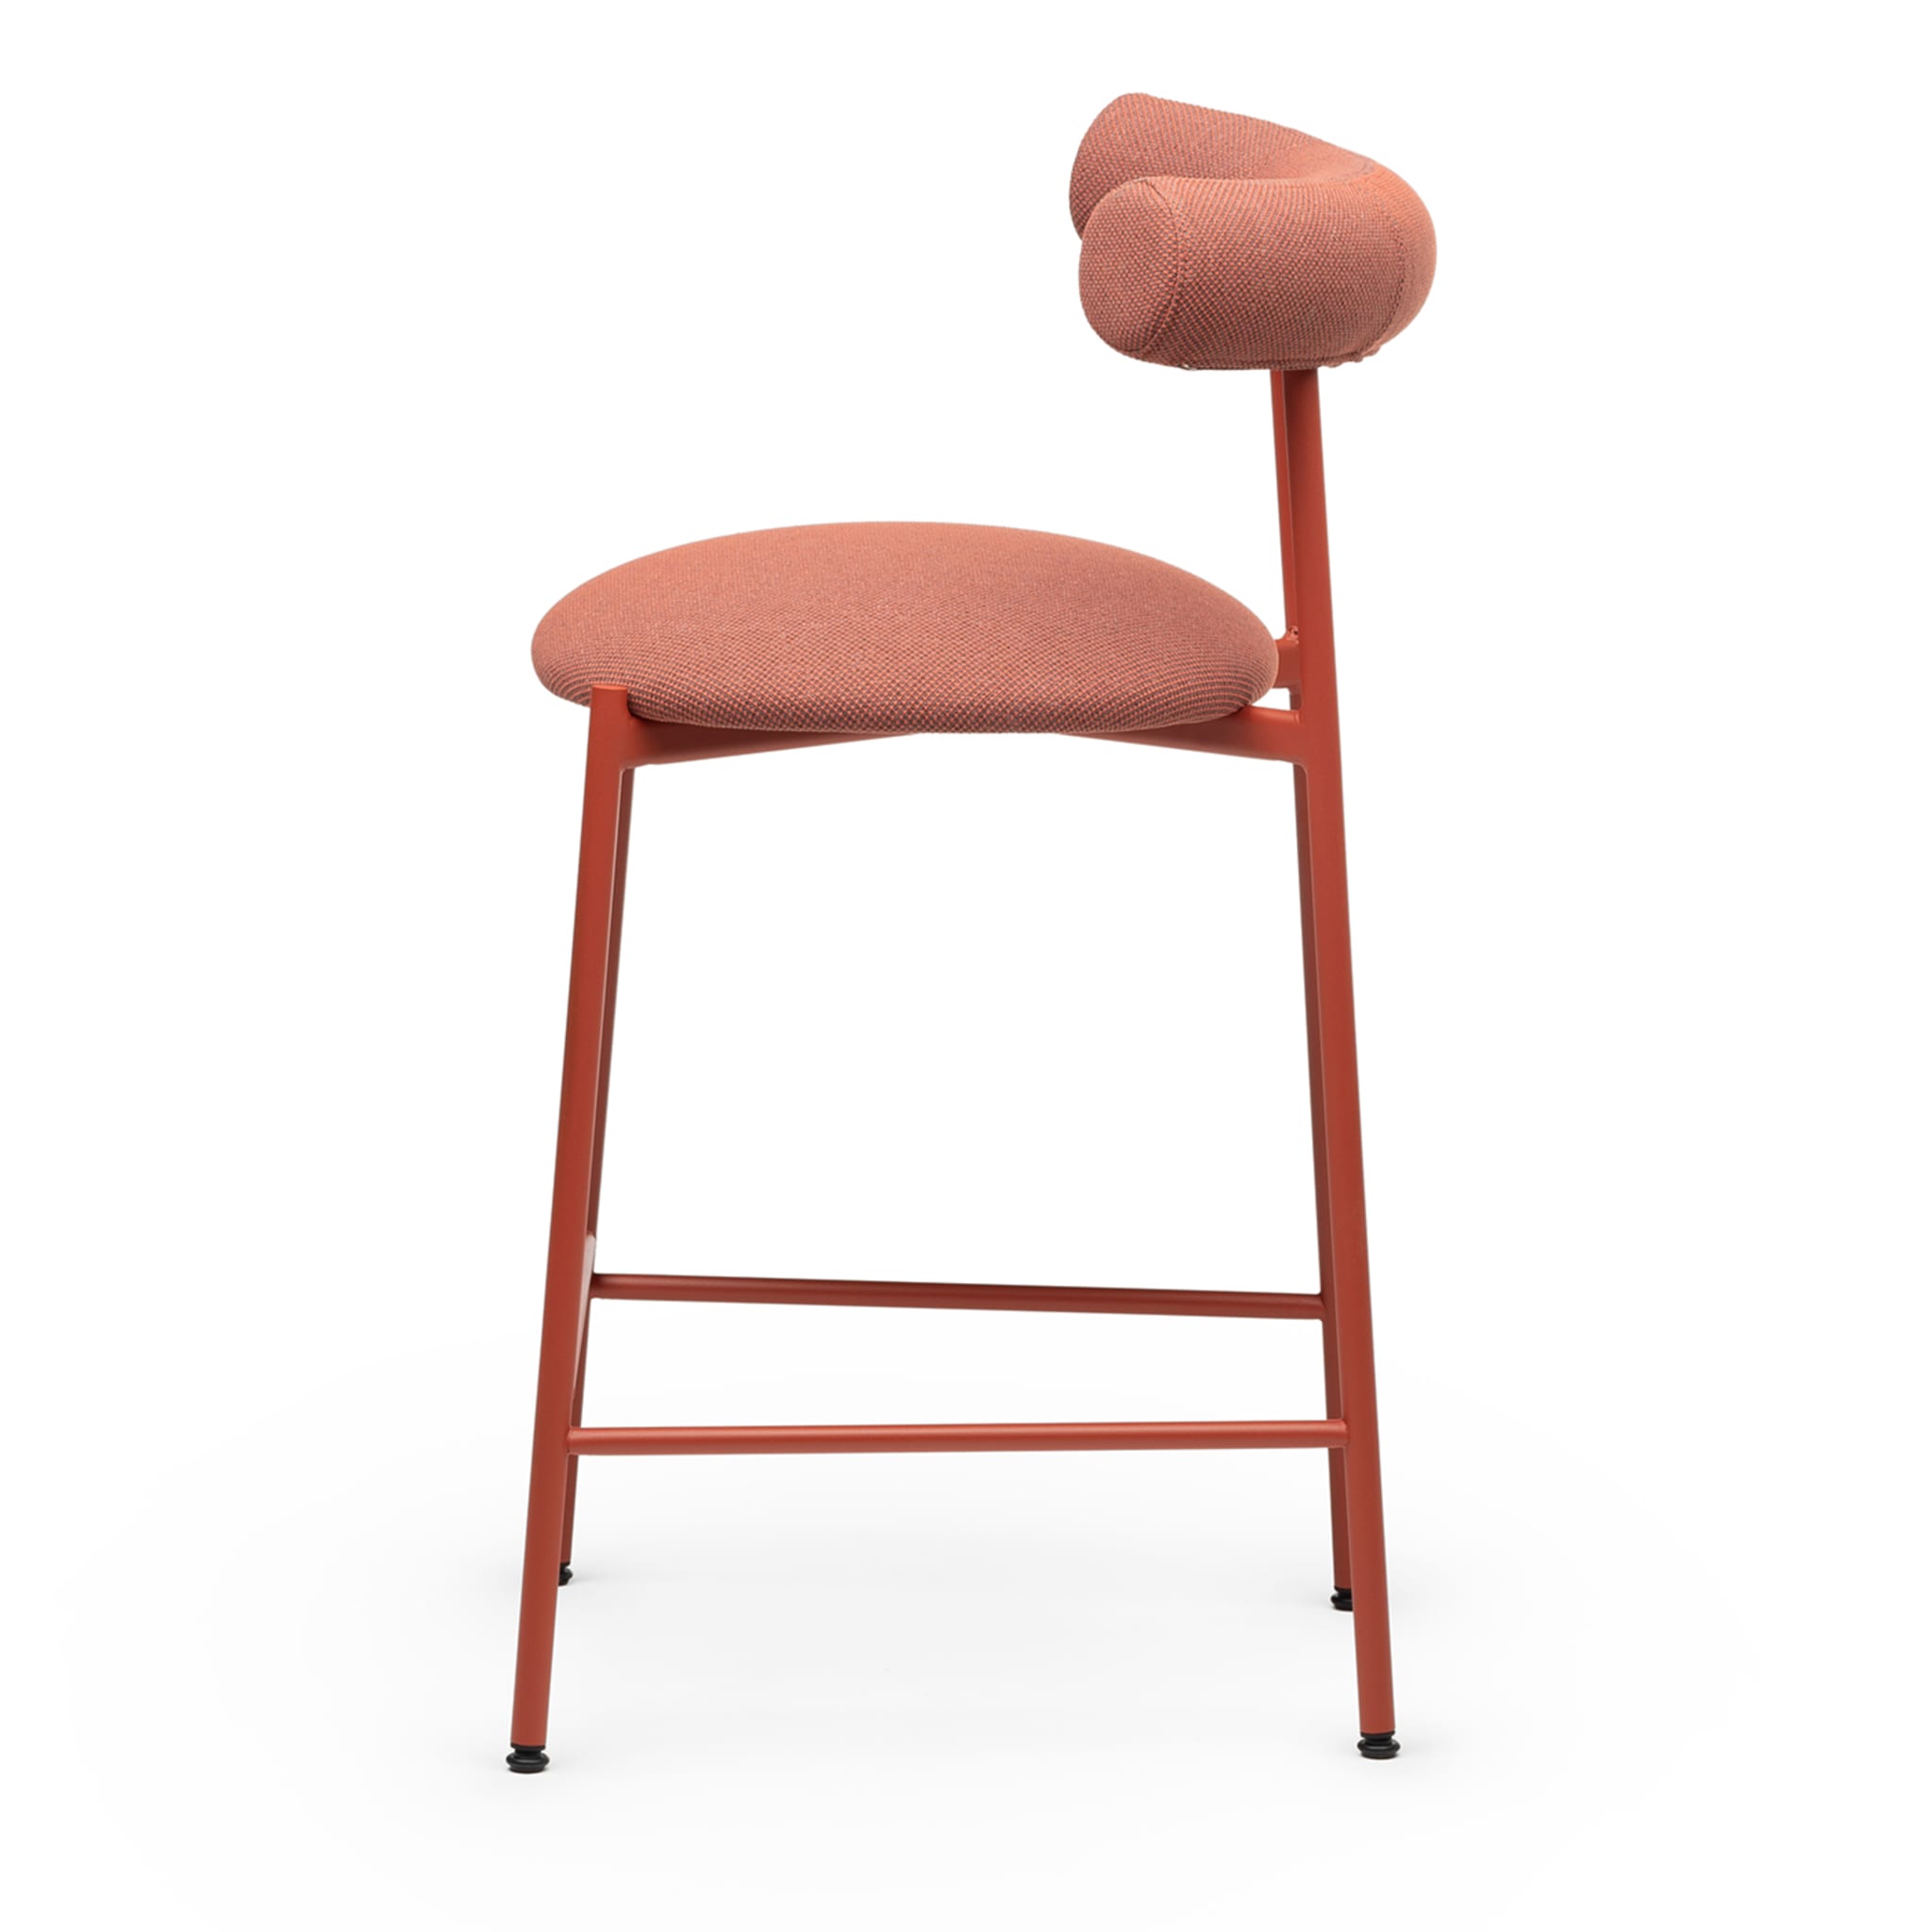 Pampa SG-65 Low Pink & Red Stool by Studio Pastina - Alternative view 1